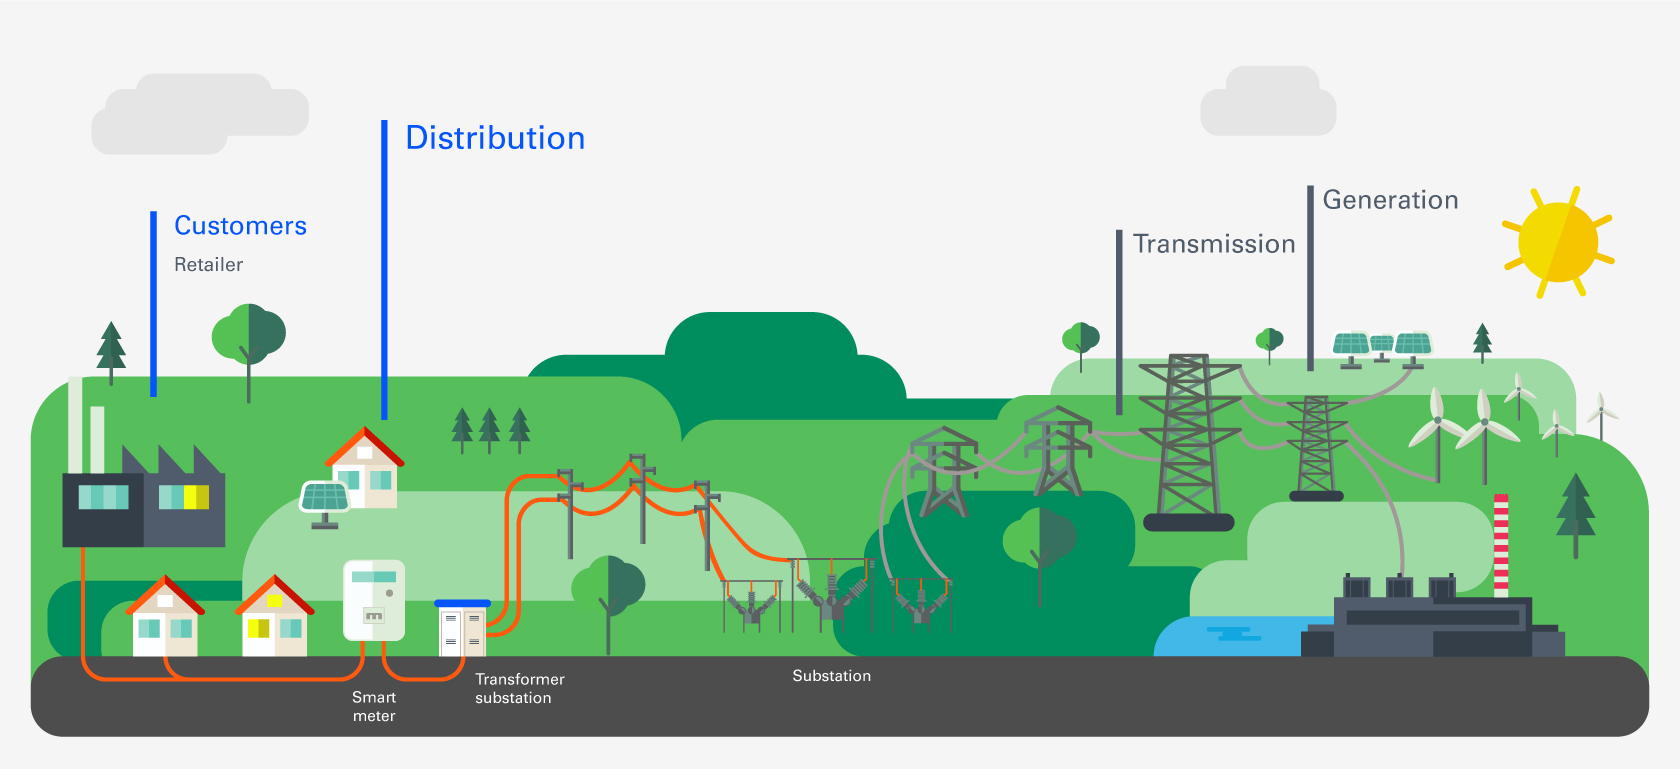 This image explains the route energy takes from the generating companies (nuclear, thermal, combined cycle plants, solar panels, mills, etc.), through the high voltage transmission network, to the distribution network in urban areas, and finally ending up at your home.